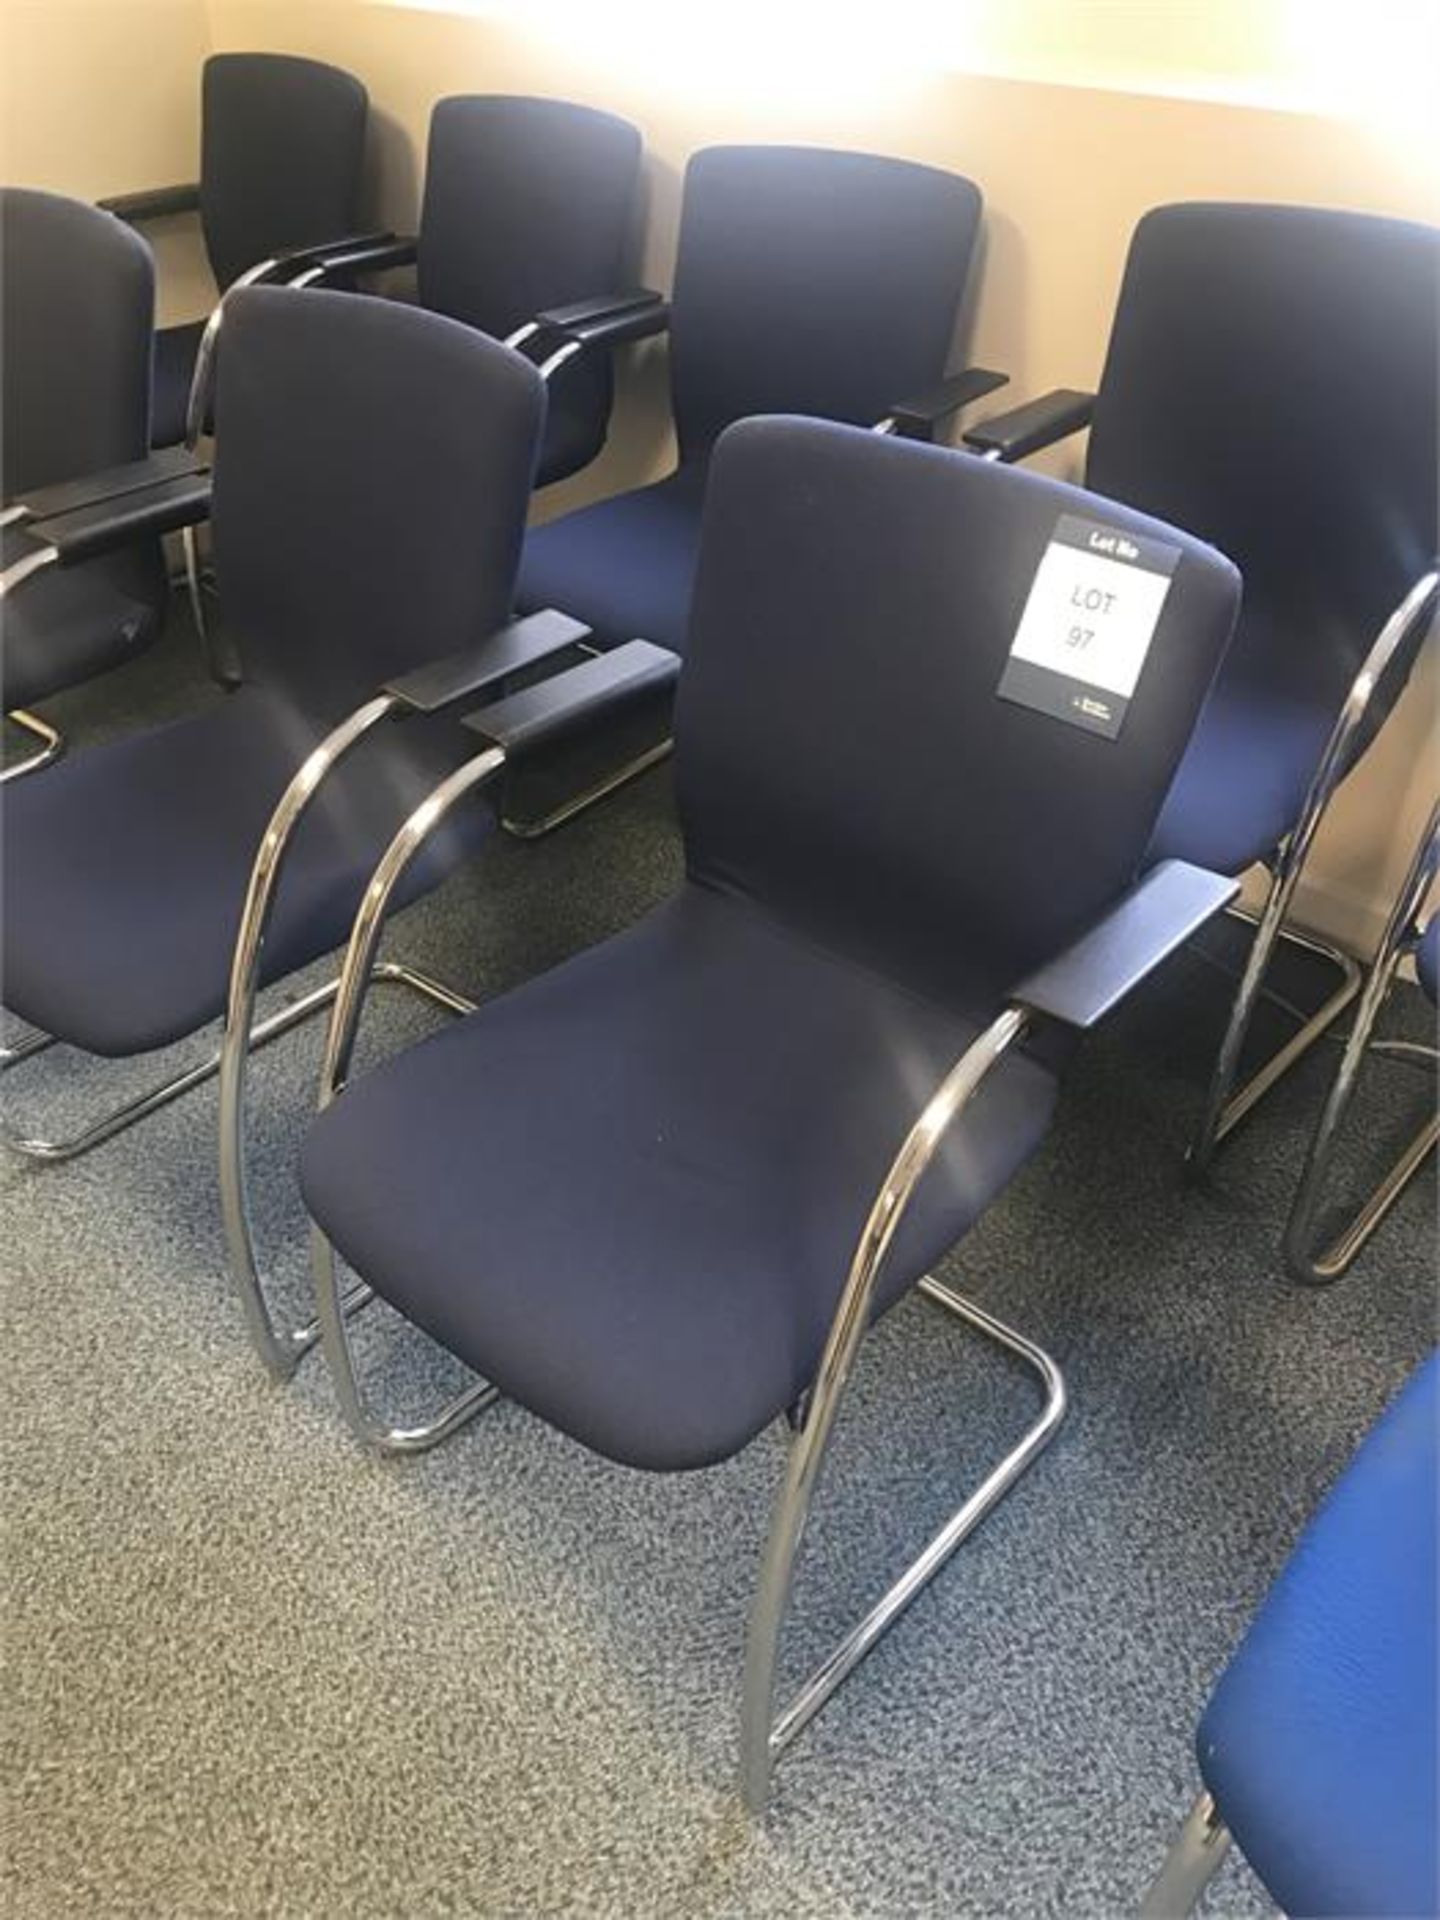 16 chrome steel framed blue tweed chairs - Image 2 of 2